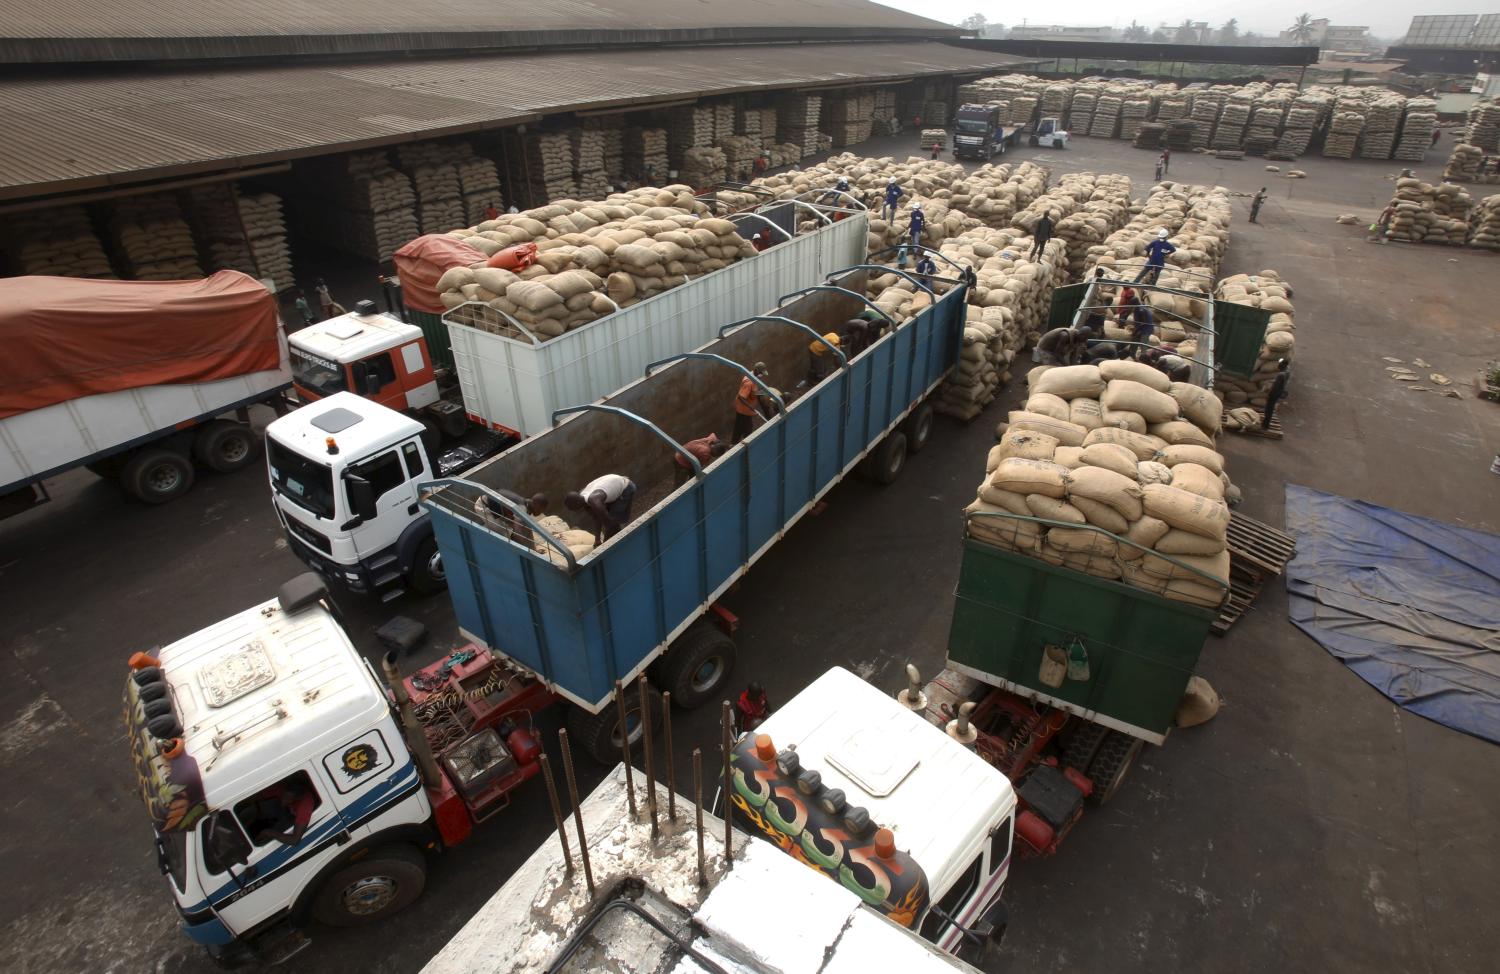 Workers unload bags of cocoa from trucks at SAF CACAO, an export firm in San-Pedro, Ivory Coast January 29, 2016. REUTERS/Thierry Gouegnon - GF10000289560